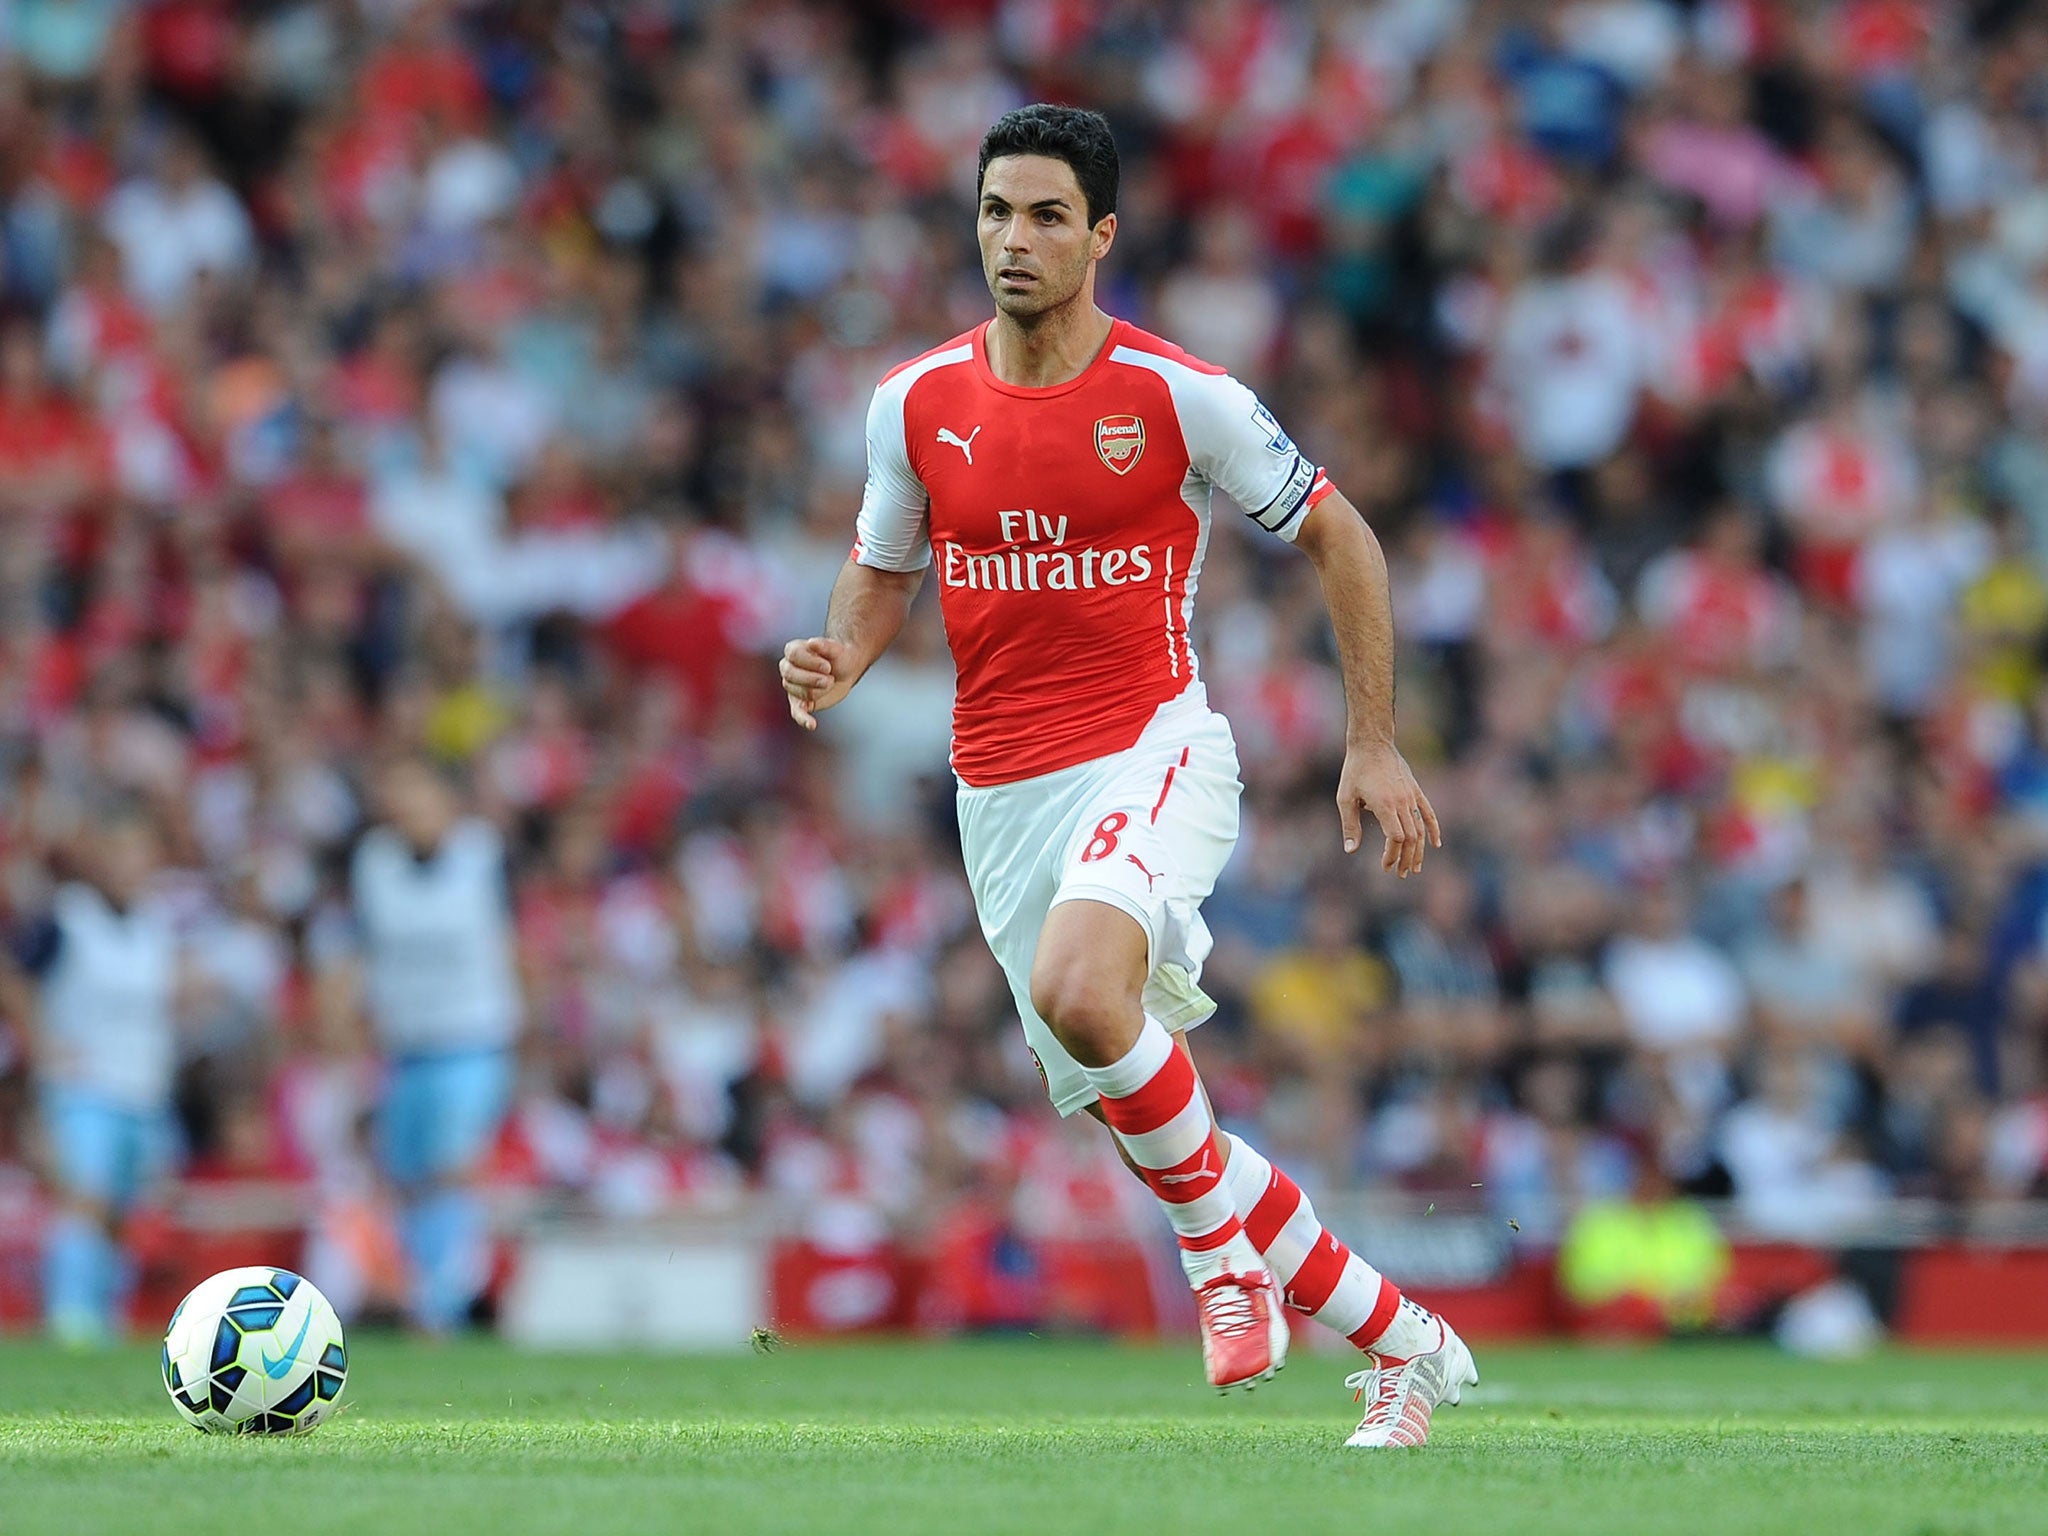 Fabregas could have replaced Mikel Arteta in the Arsenal side rather than Mesut Ozil or Aaron Ramsey